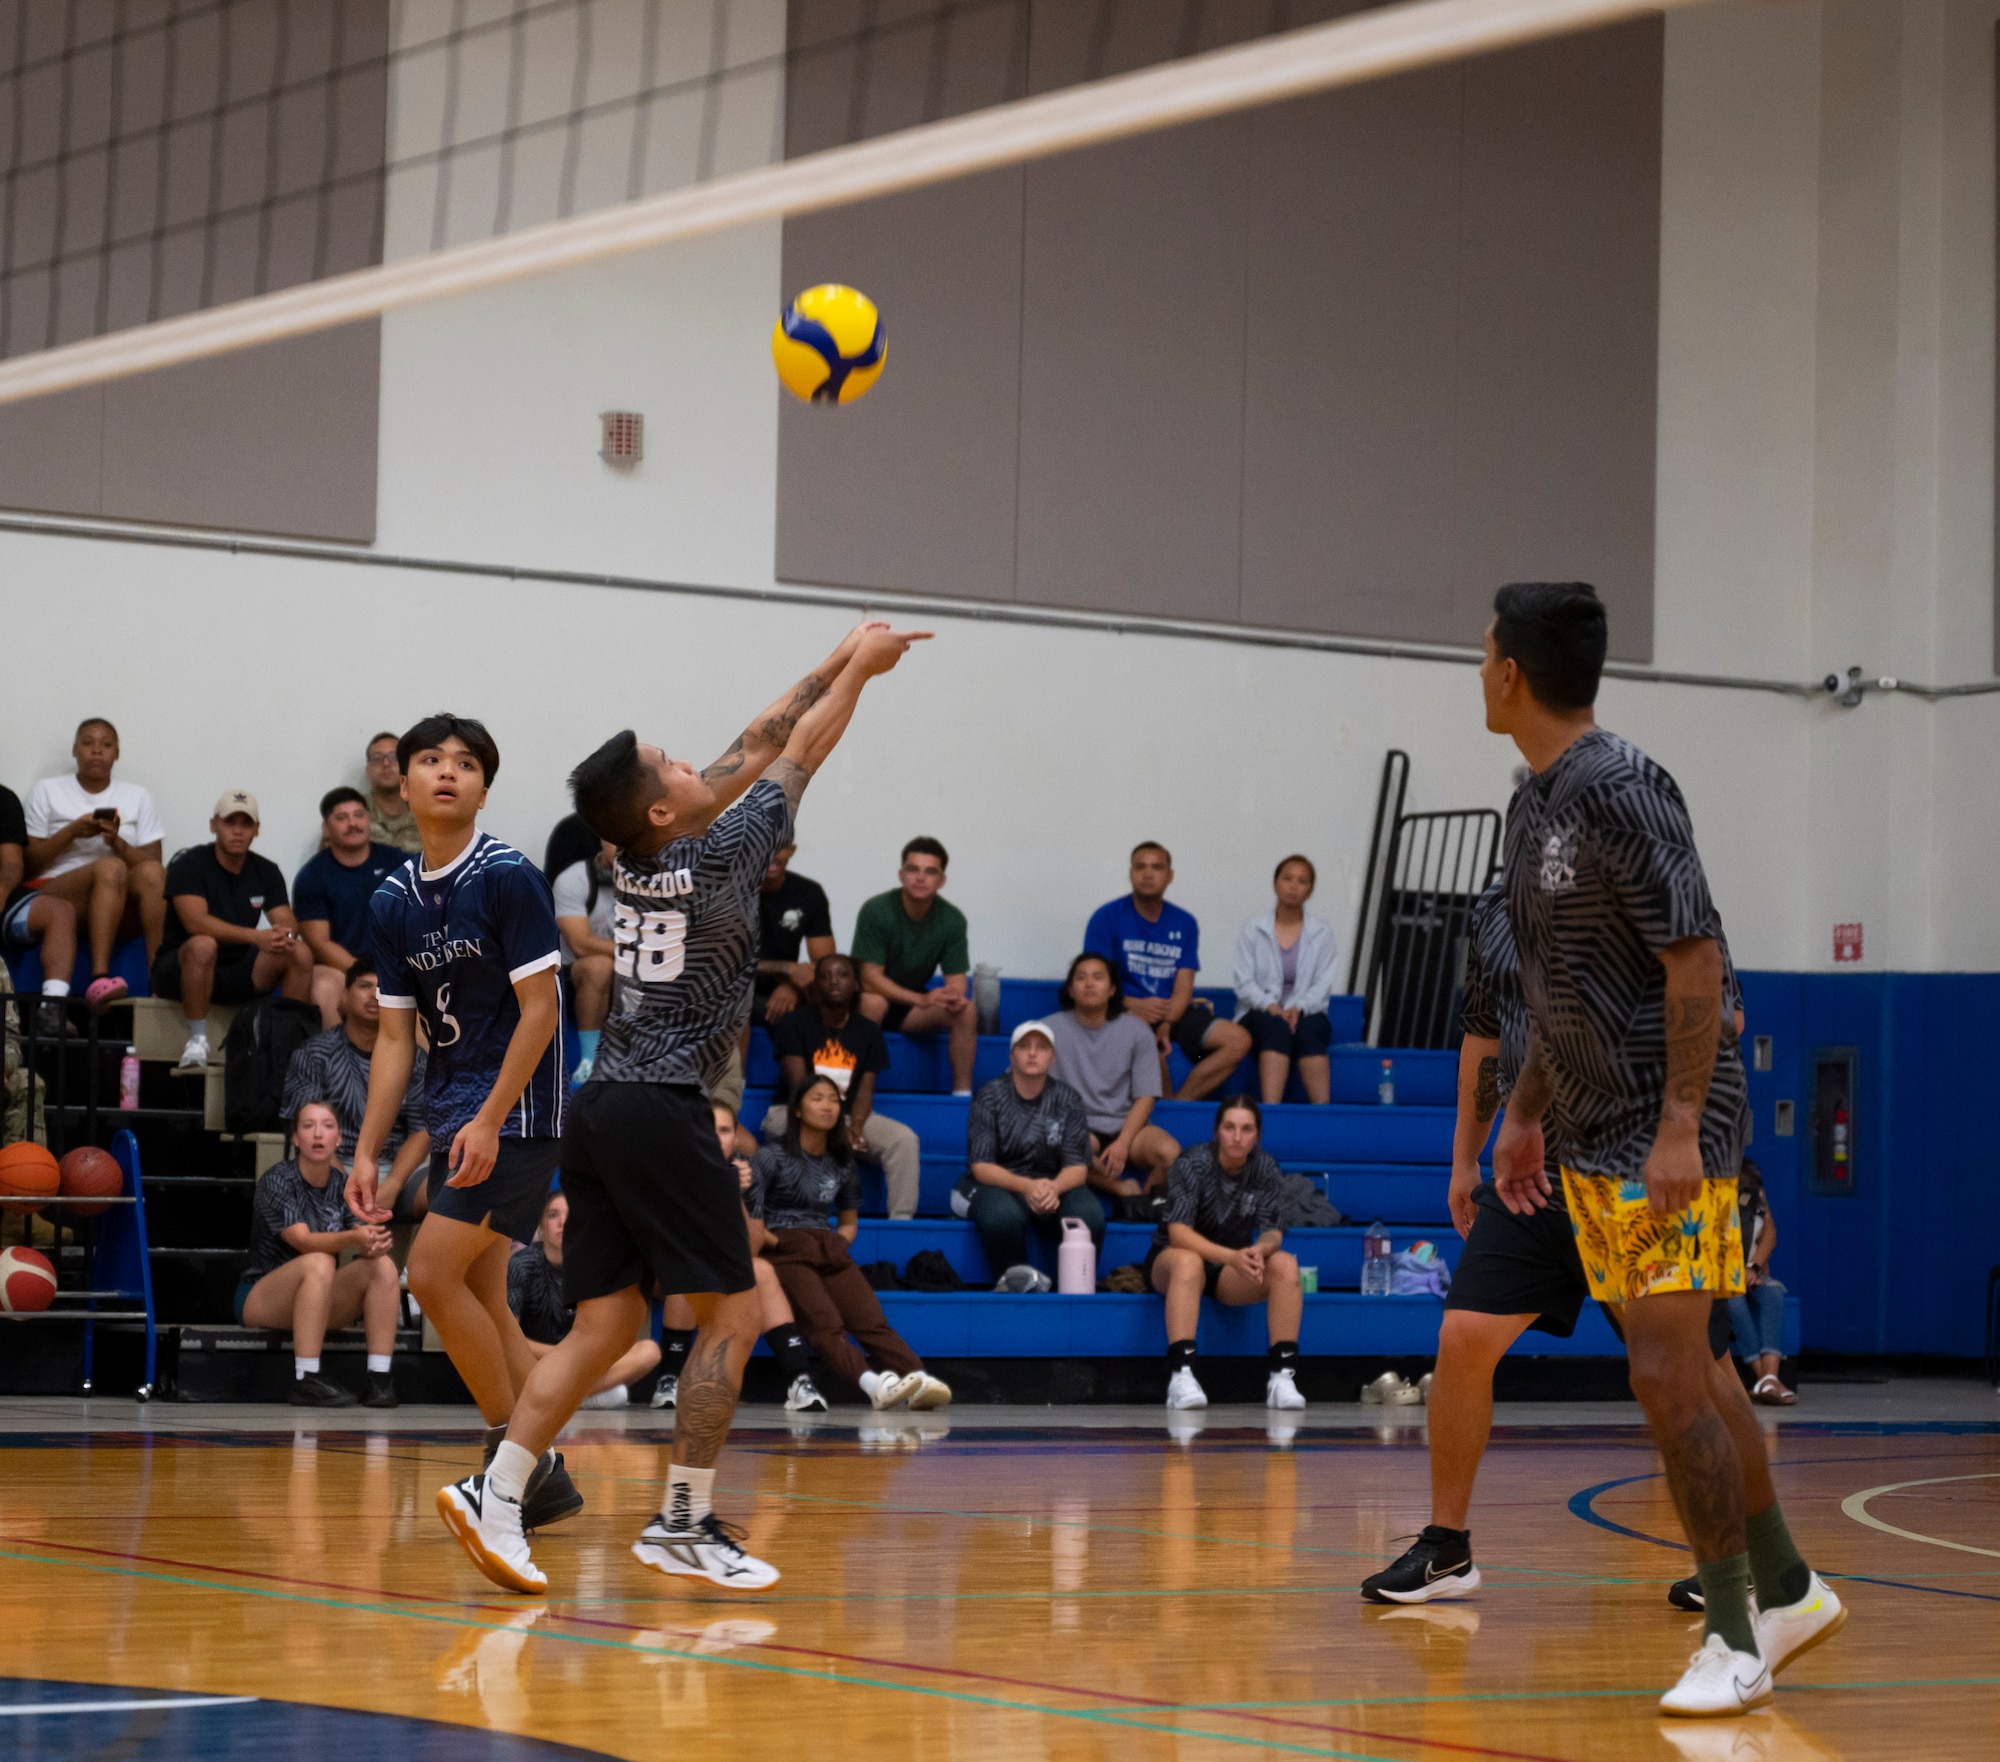 U.S. Air Force Staff Sgt. Sydney Talledo, a member of the Security Forces Squadron’s intramural volleyball team, sets the ball during the championship game on Andersen Air Force Base, Guam, Oct. 26, 2023.  Andersen’s intramural volleyball league ended in a climactic final game between the Security Forces Squadron and CES. The game ended with SFS being named the champions. (U.S. Air Force photo by Airman 1st Class Spencer Perkins)